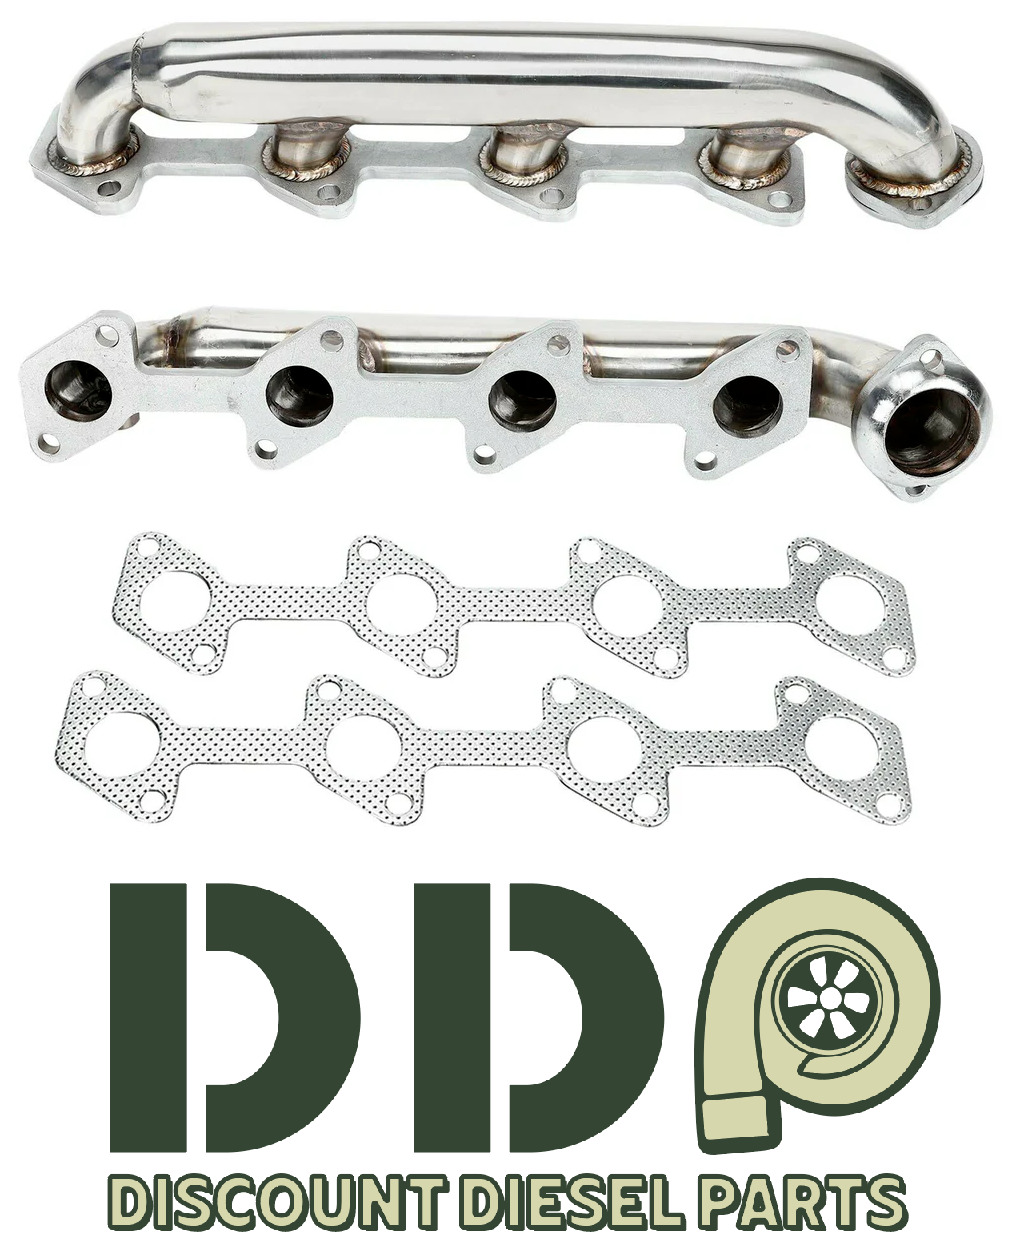 Stainless Steel Manifold Headers For 03-07 Ford Powerstroke Diesel F250 F350 6.0